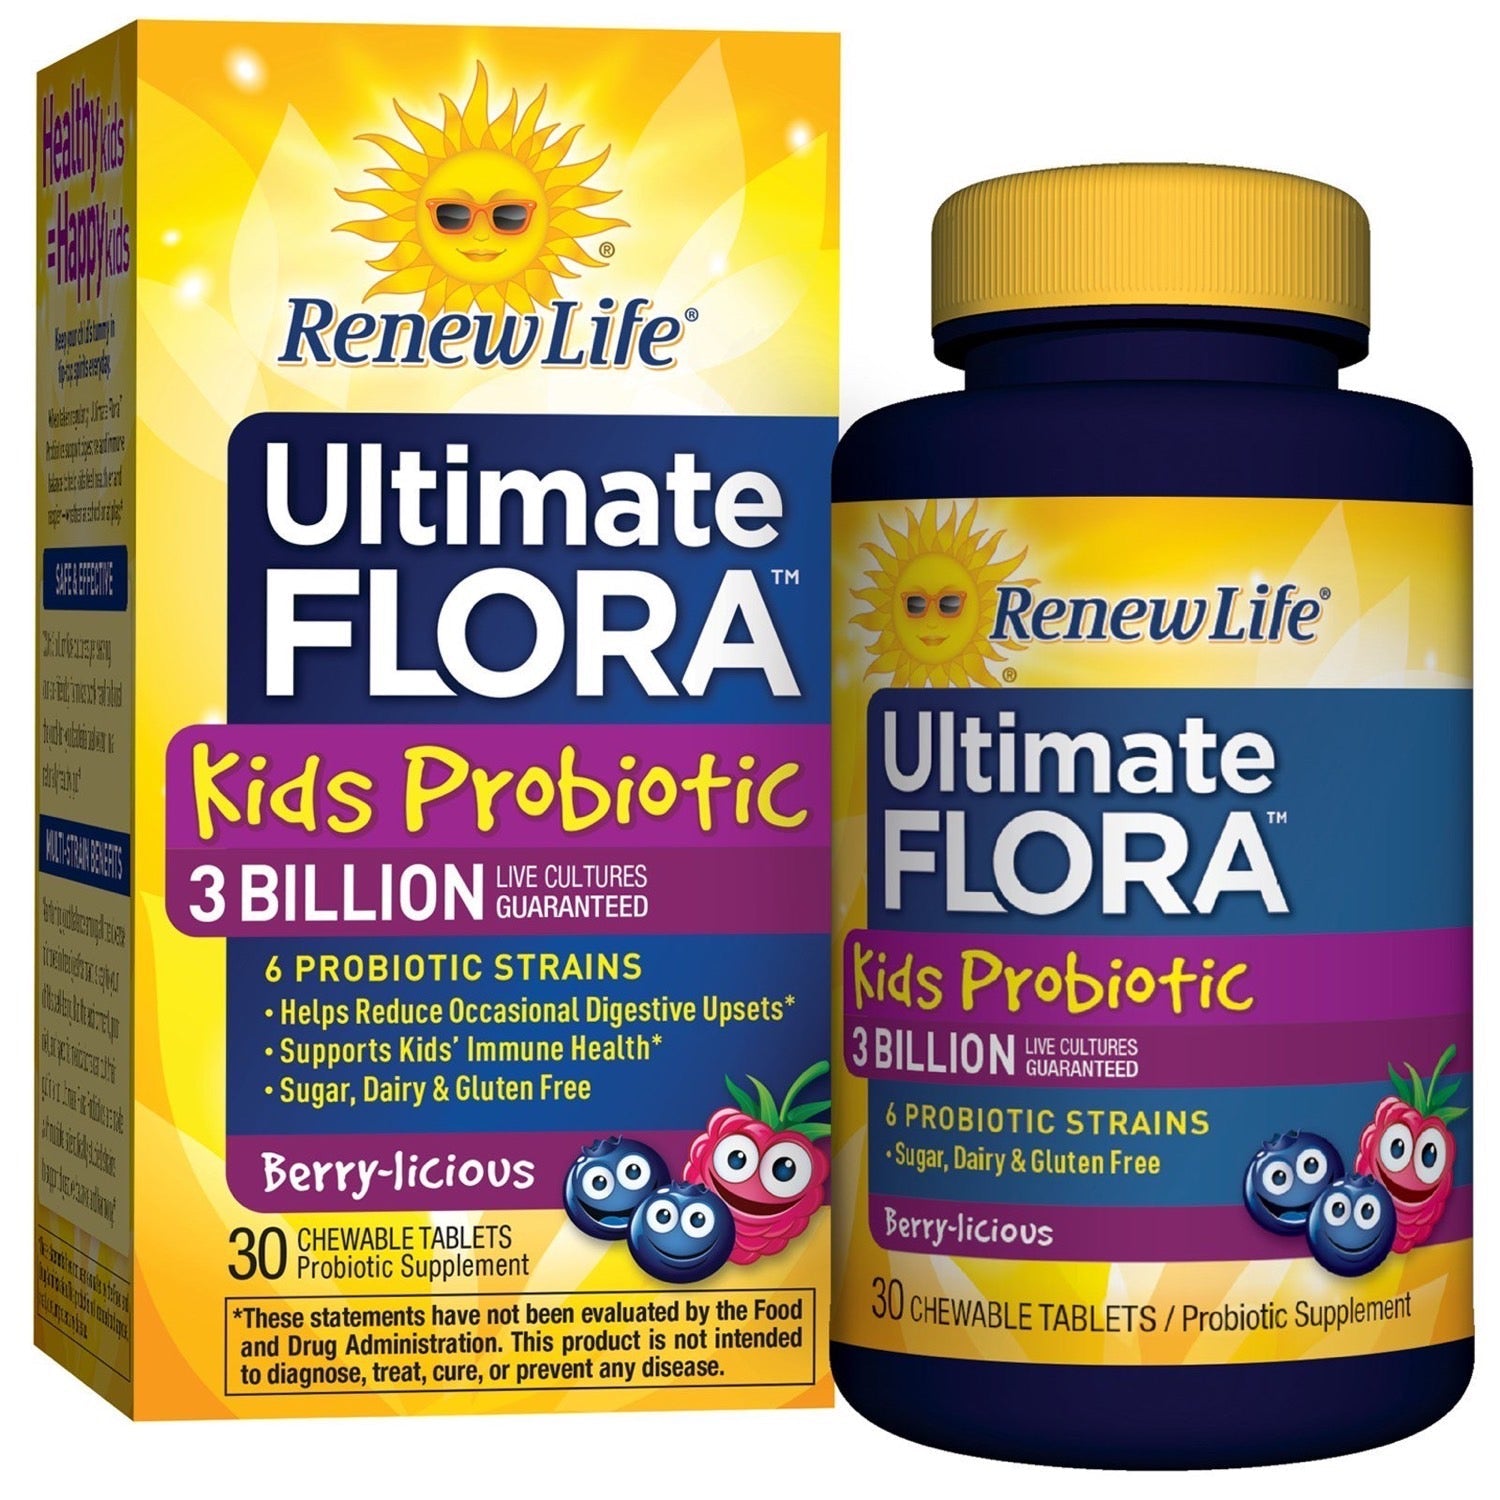 Renew Life Re Ultimate Flora Kids Probiotic, 3 Billion CFU Guaranteed, 6 Strains, Gluten, Dairy And Soy Free; 30 Chewable Tablets, Berry-licious Flavor, 60-Day Money Back Guarantee